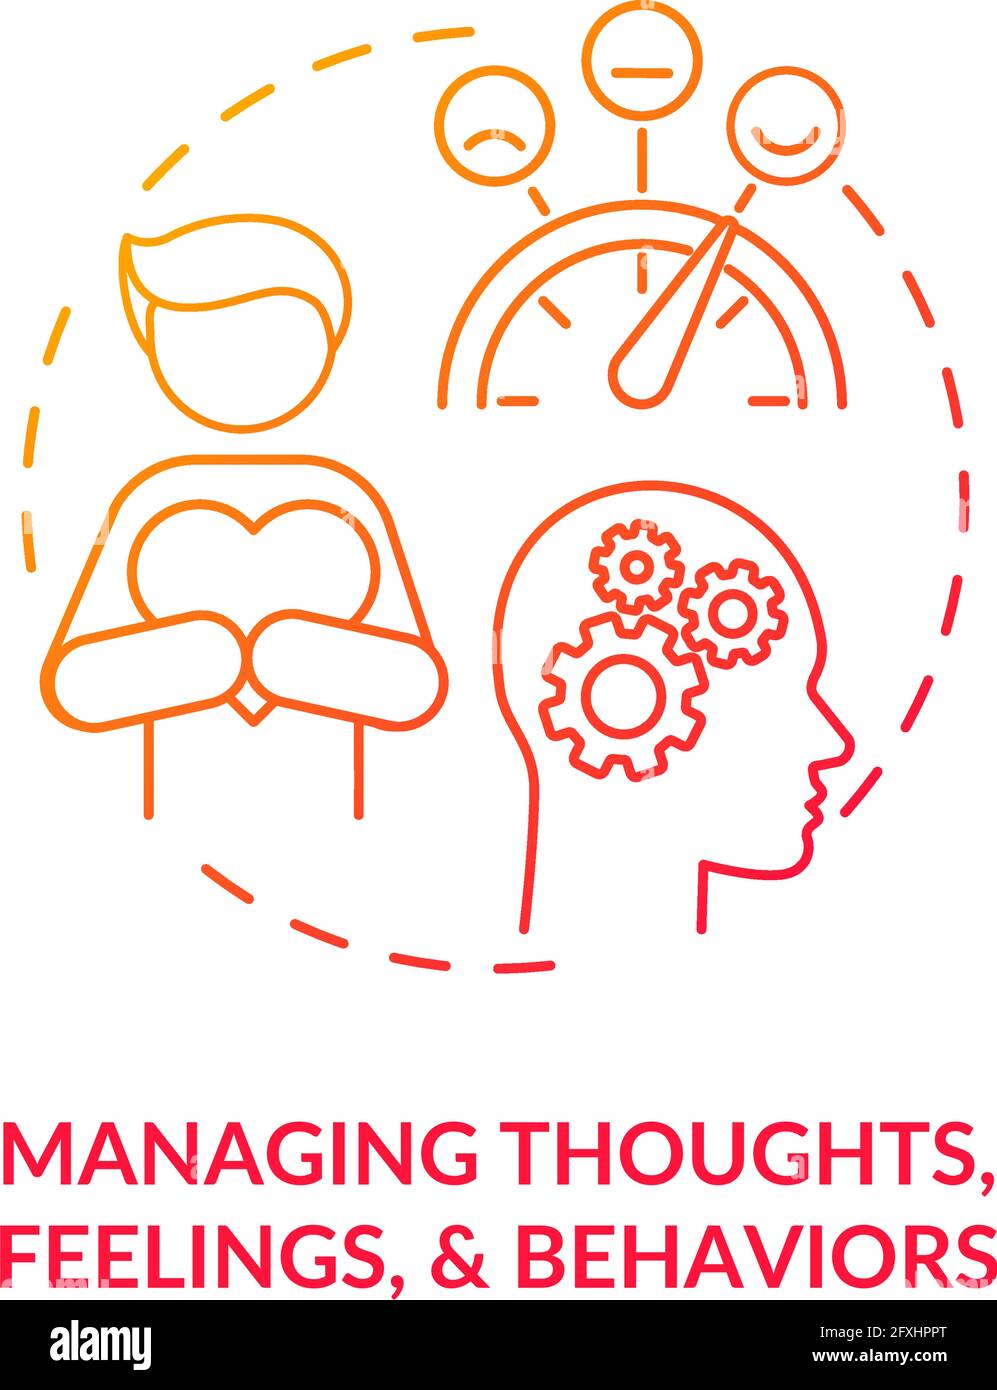 Managing thoughts, feelings and behaviors concept icon Stock Vector